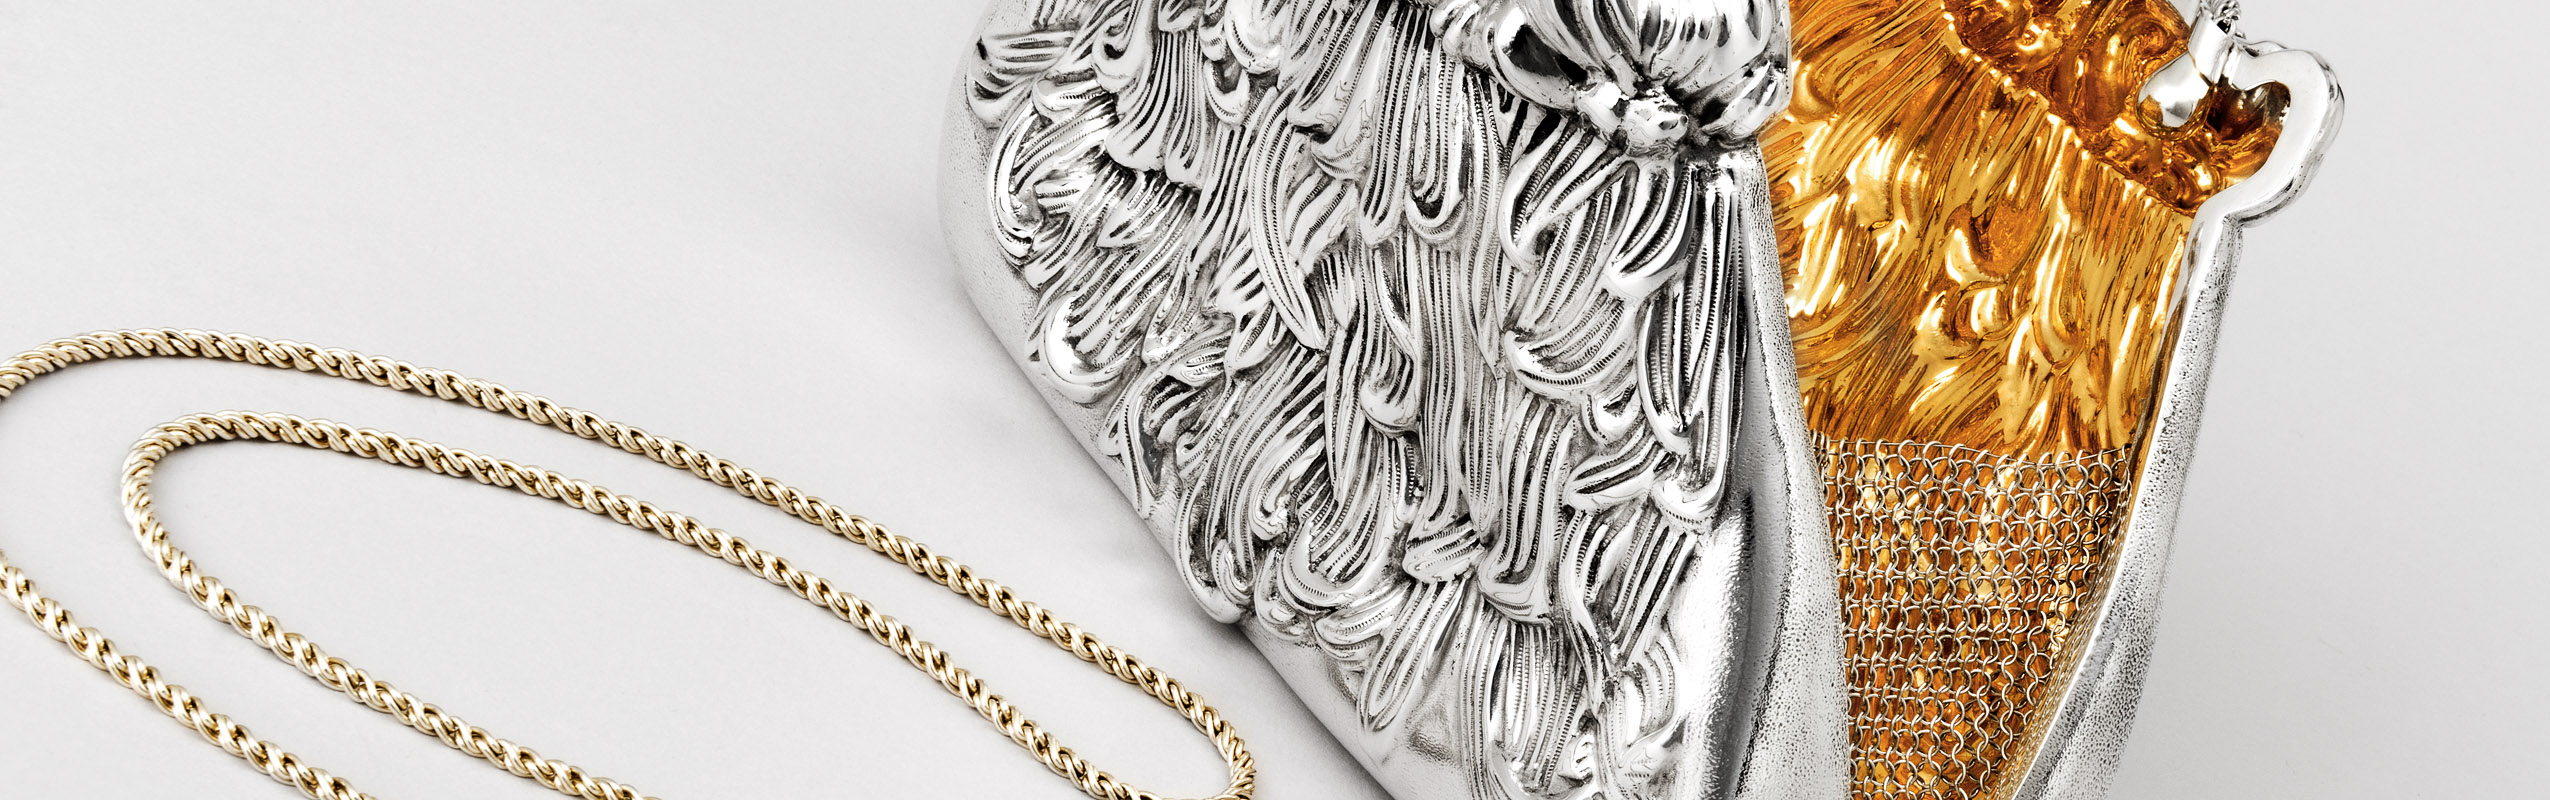 Photo of a sterling silver and 24K gold evening purse  by Michael Galmer.